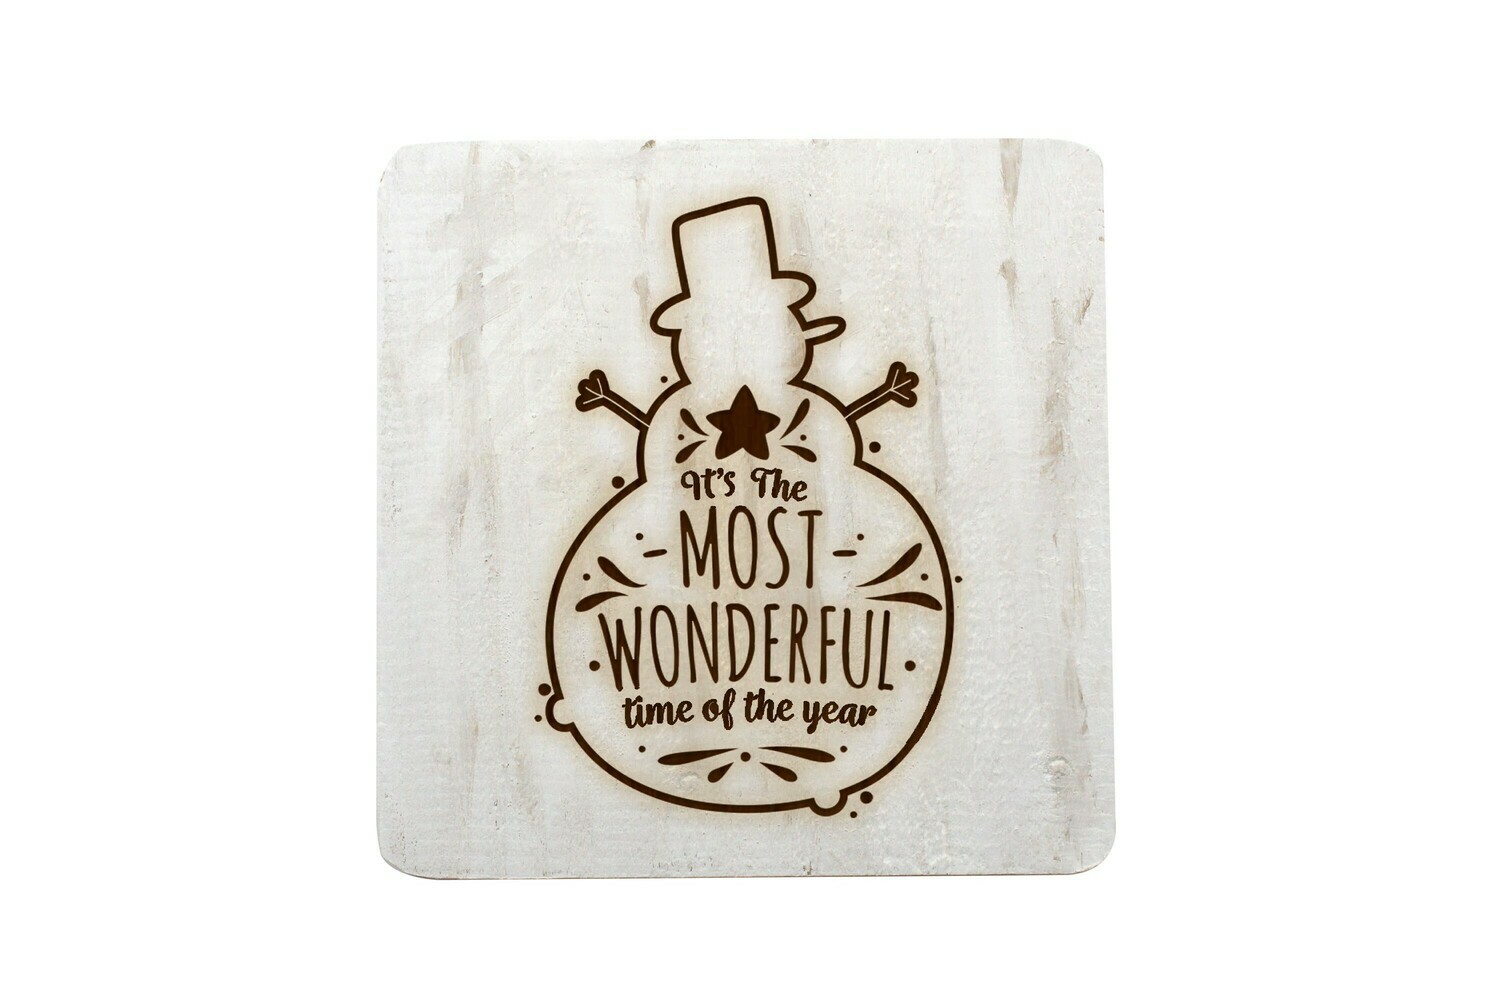 It's the Most Wonderful Time of the Year Hand-Painted Wood Coaster Set.